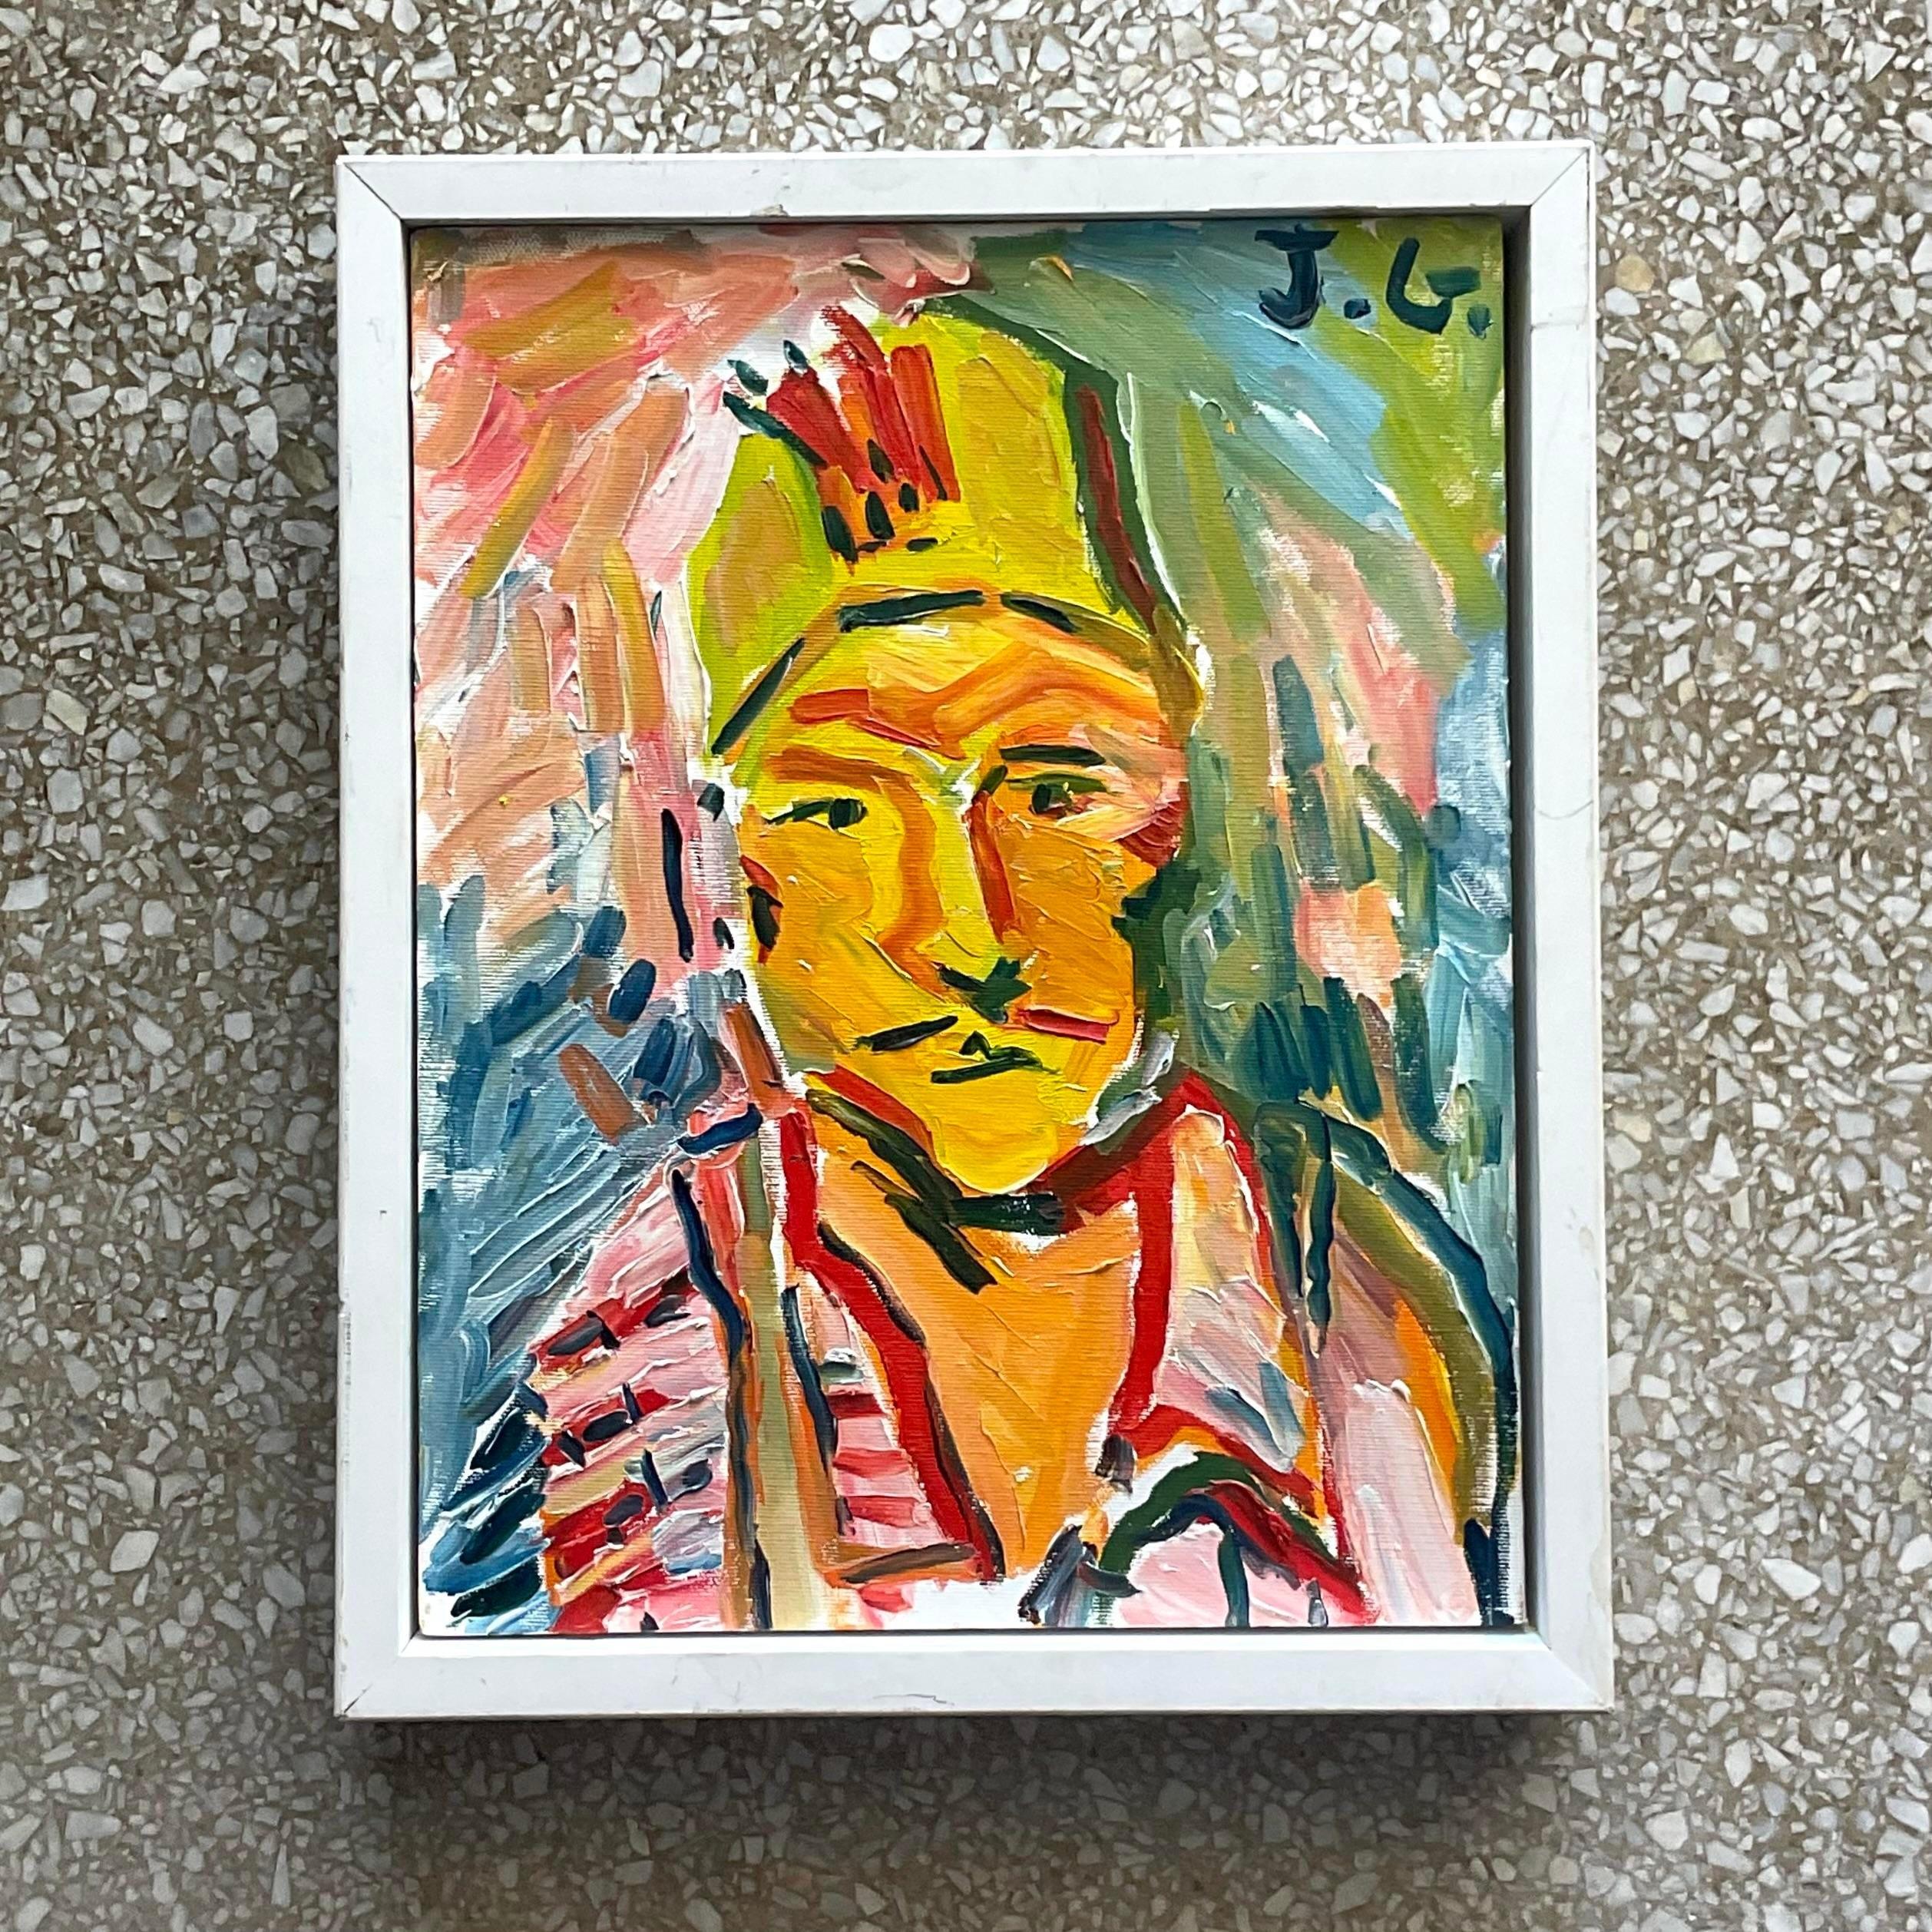 A fabulous vintage Boho original oil portrait on board. A chic and colorful composition of a man in a fez. Signed by the artist. Acquired from a NY estate.